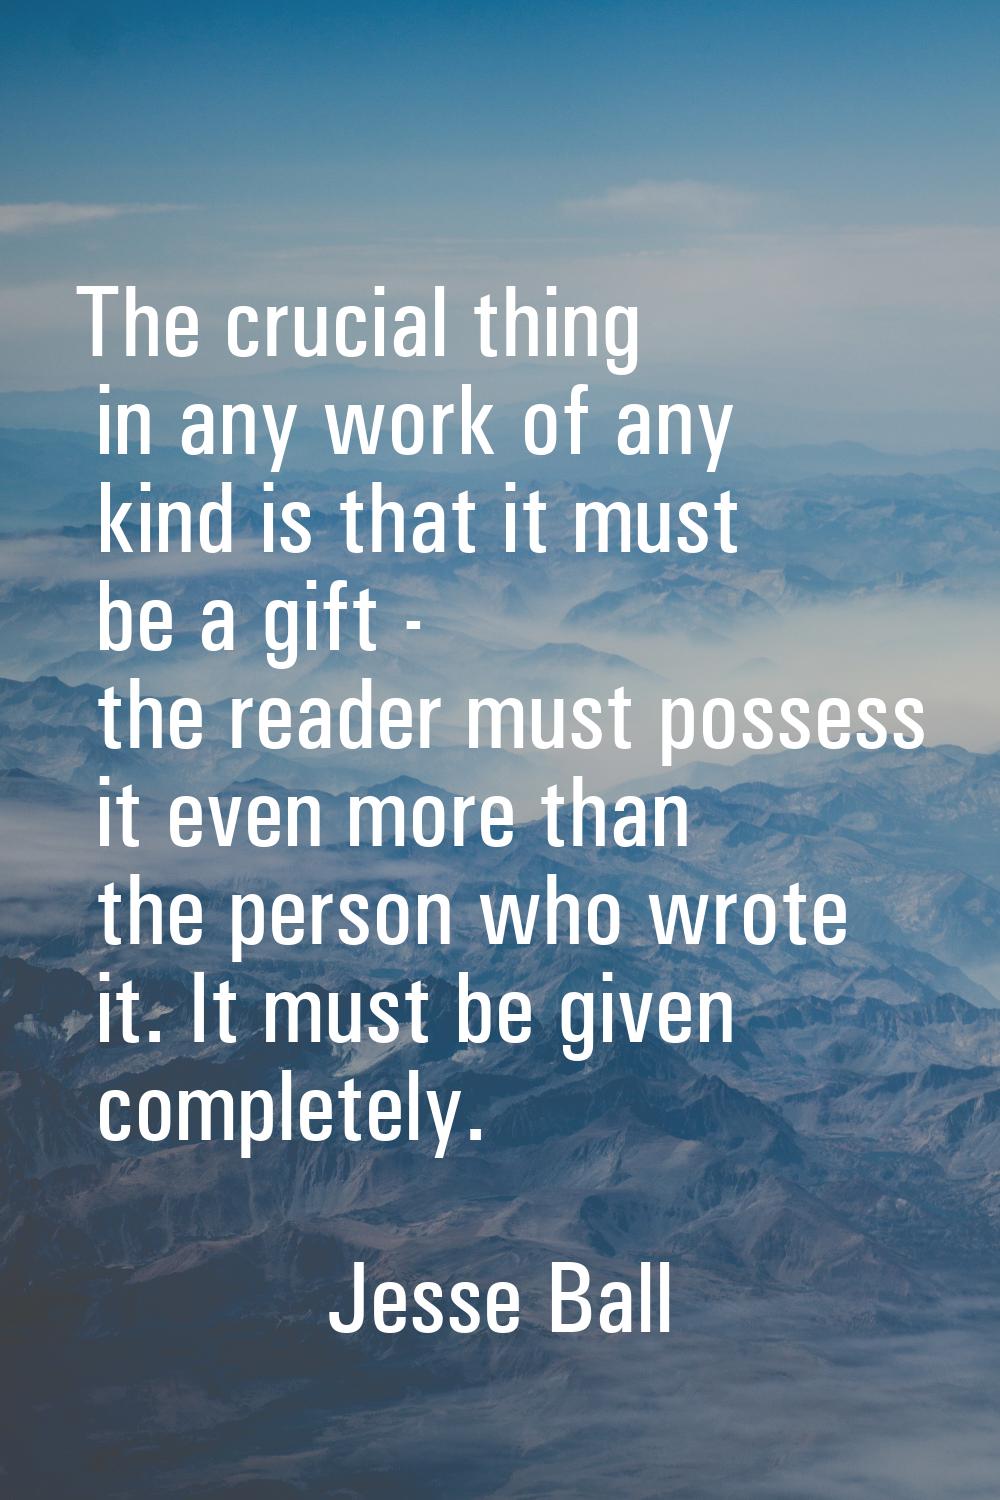 The crucial thing in any work of any kind is that it must be a gift - the reader must possess it ev